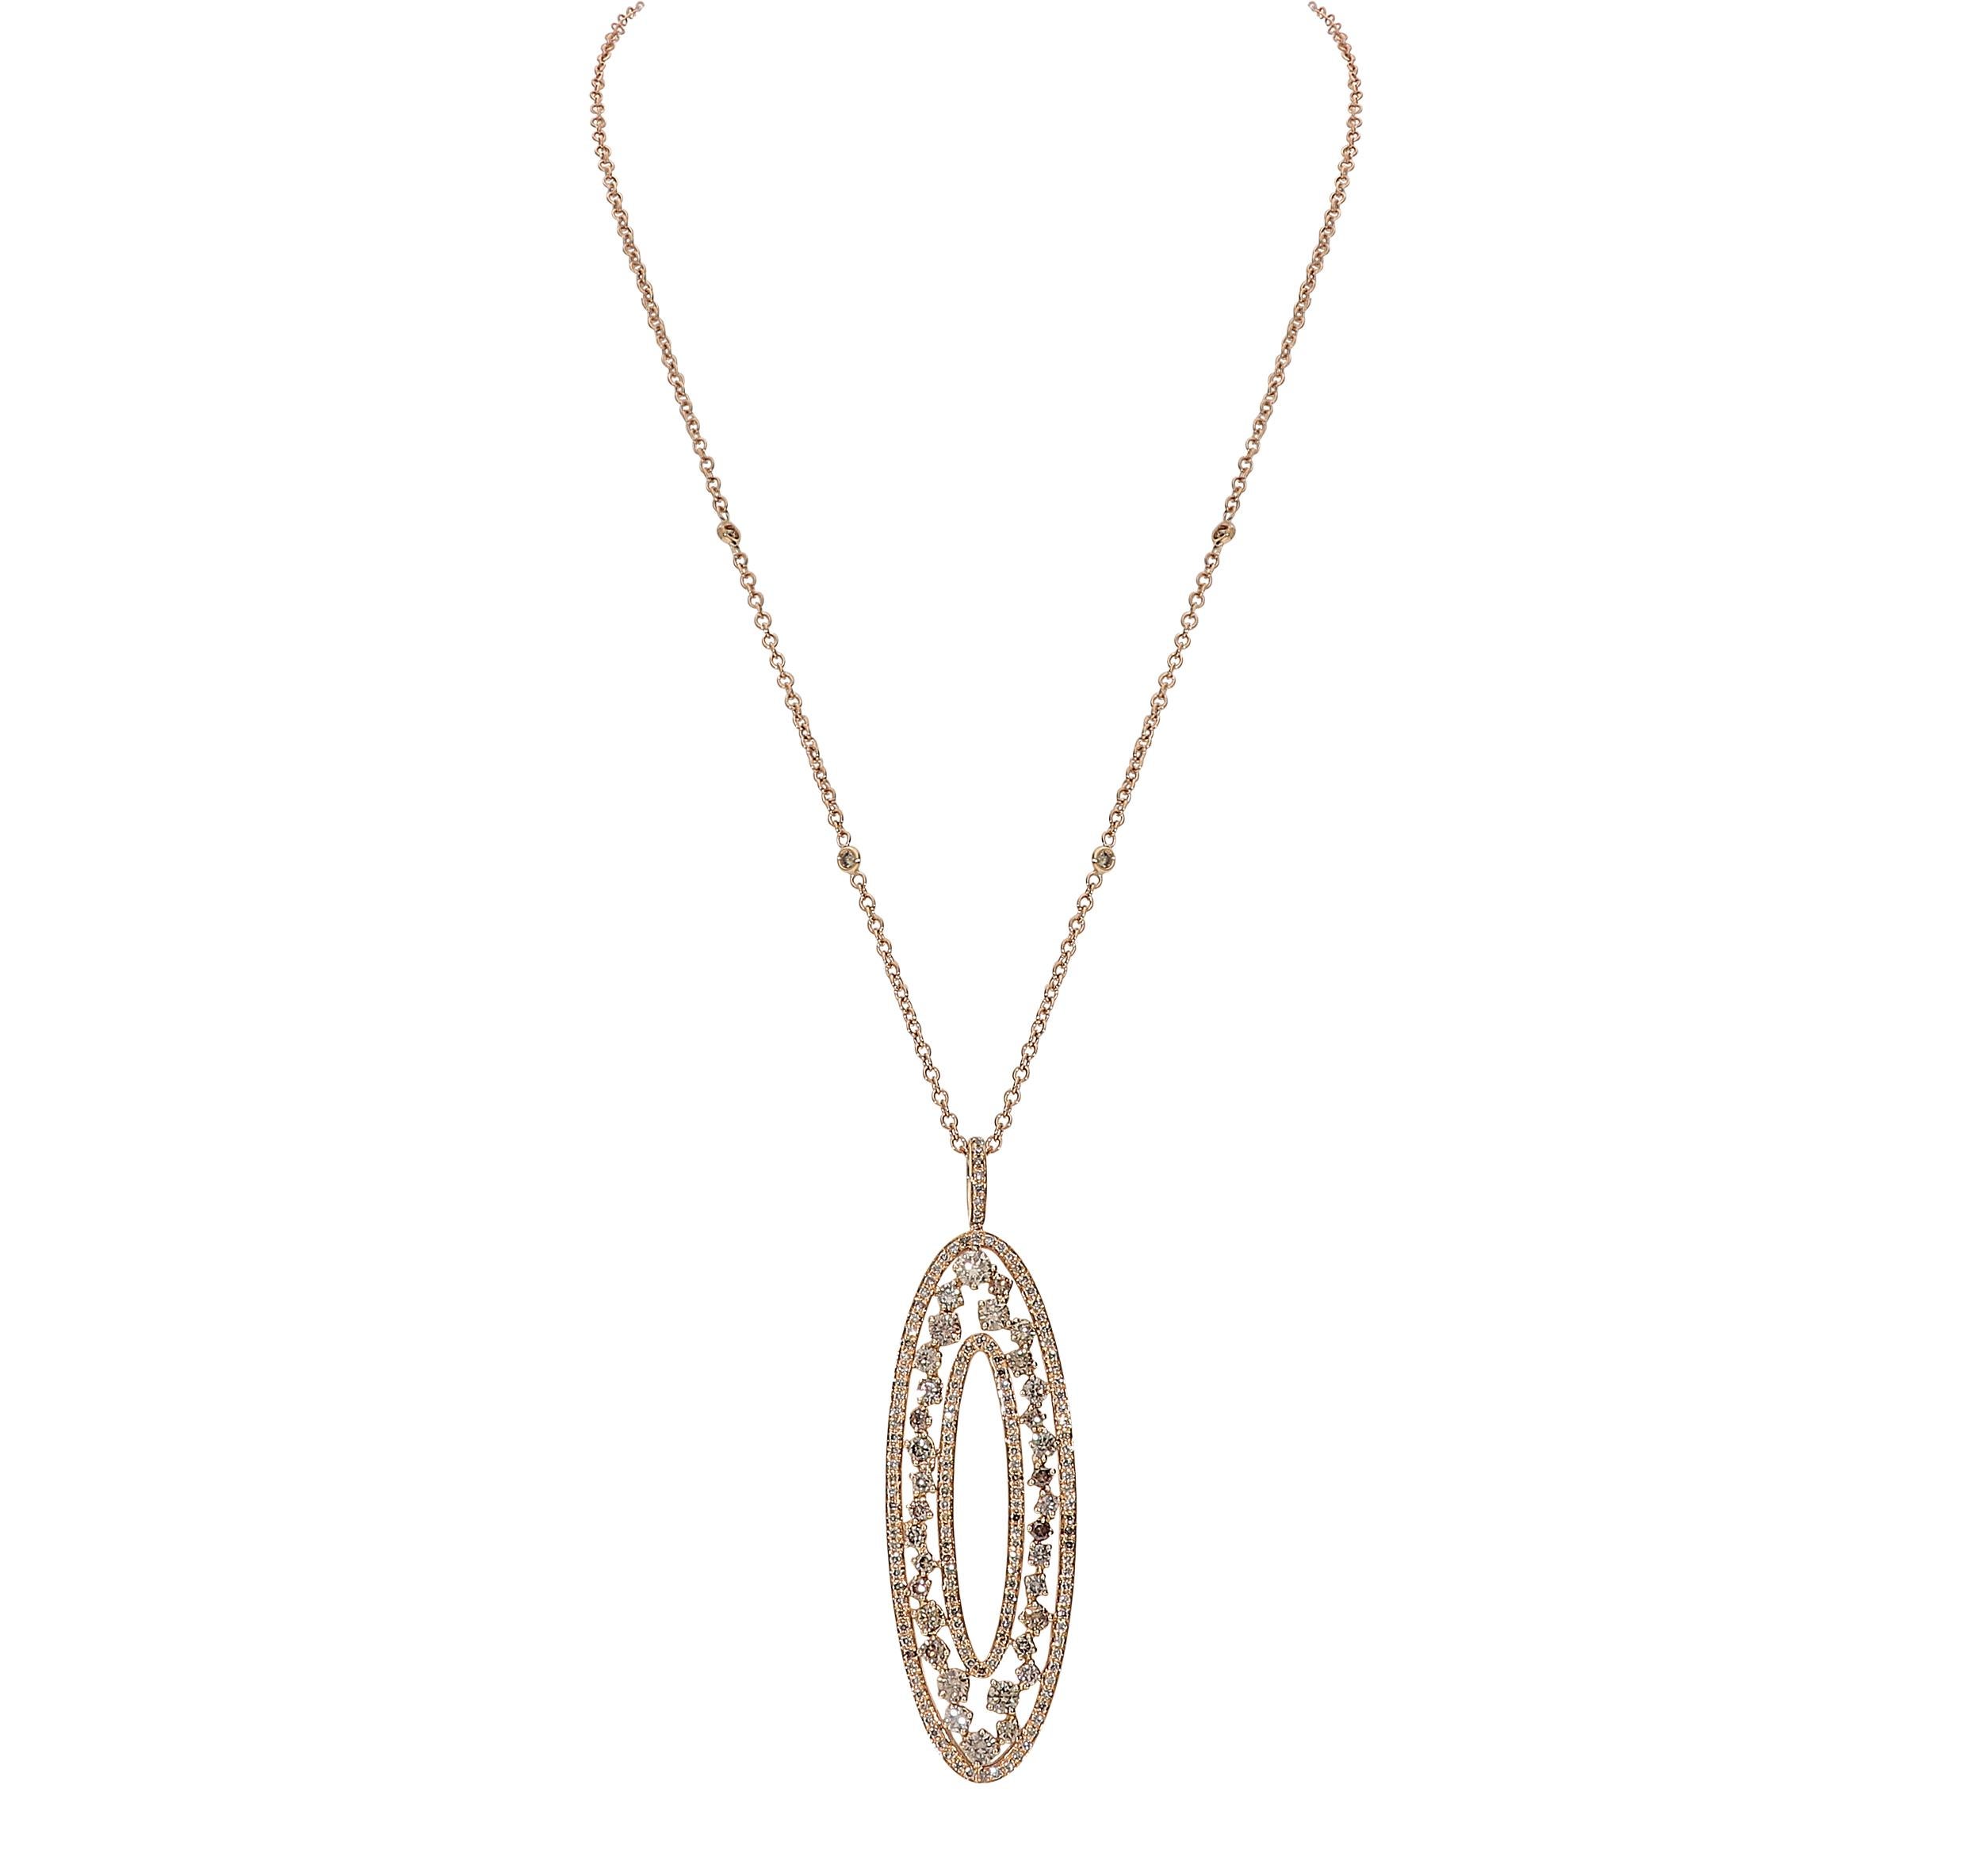 Long chain with oval shaped pendant with 3.83 carats of brown round diamonds. 
The weight of 18karat rose gold is 13.20 grams. The chain has a total length of 46centimeters adjustable to 43centimeters. Features a large pendant 2centimeters x